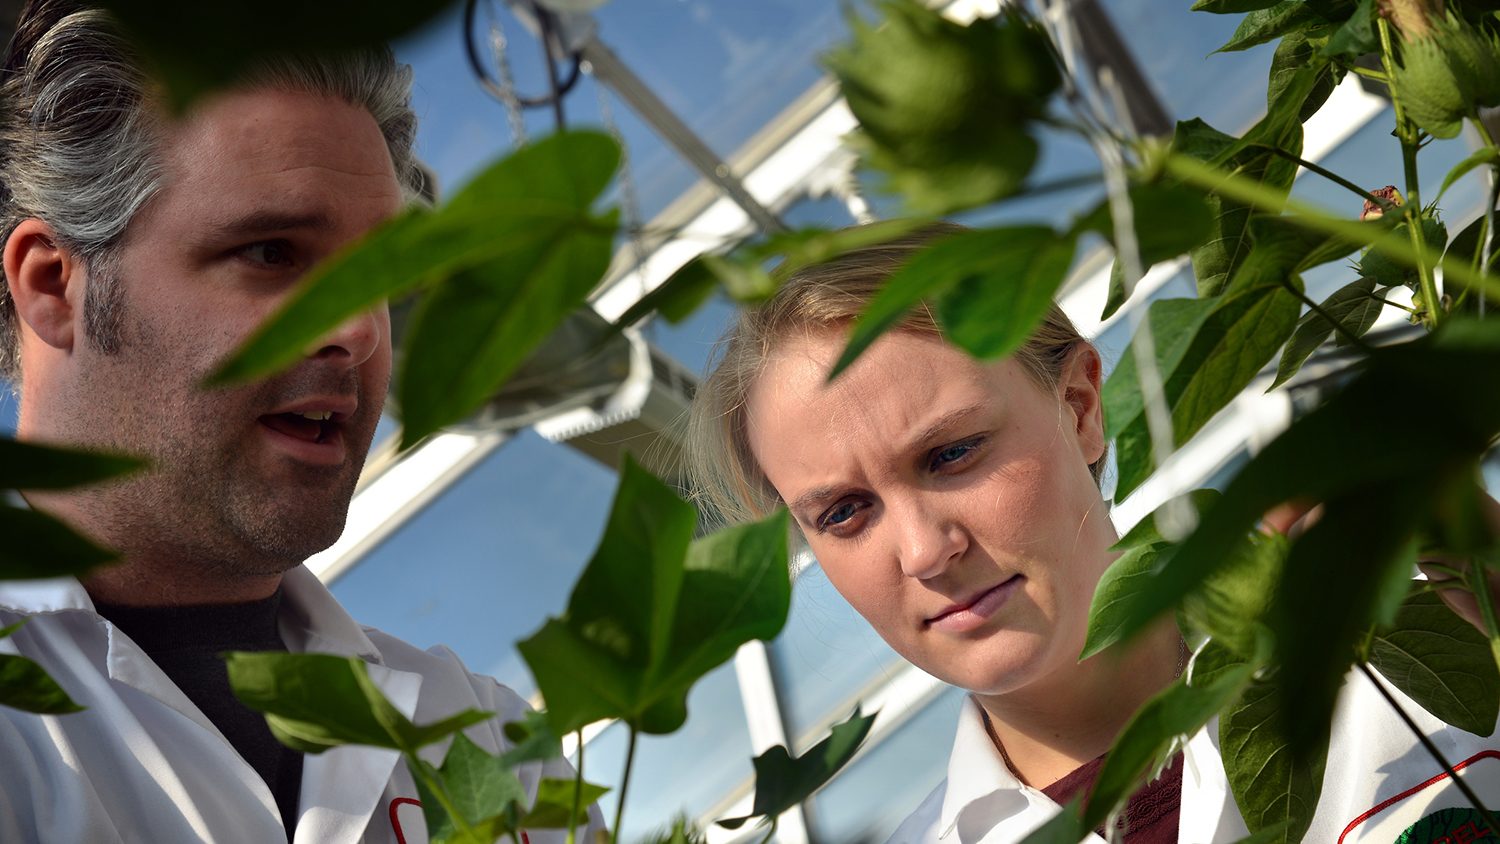 Two students looking at cotton plants.